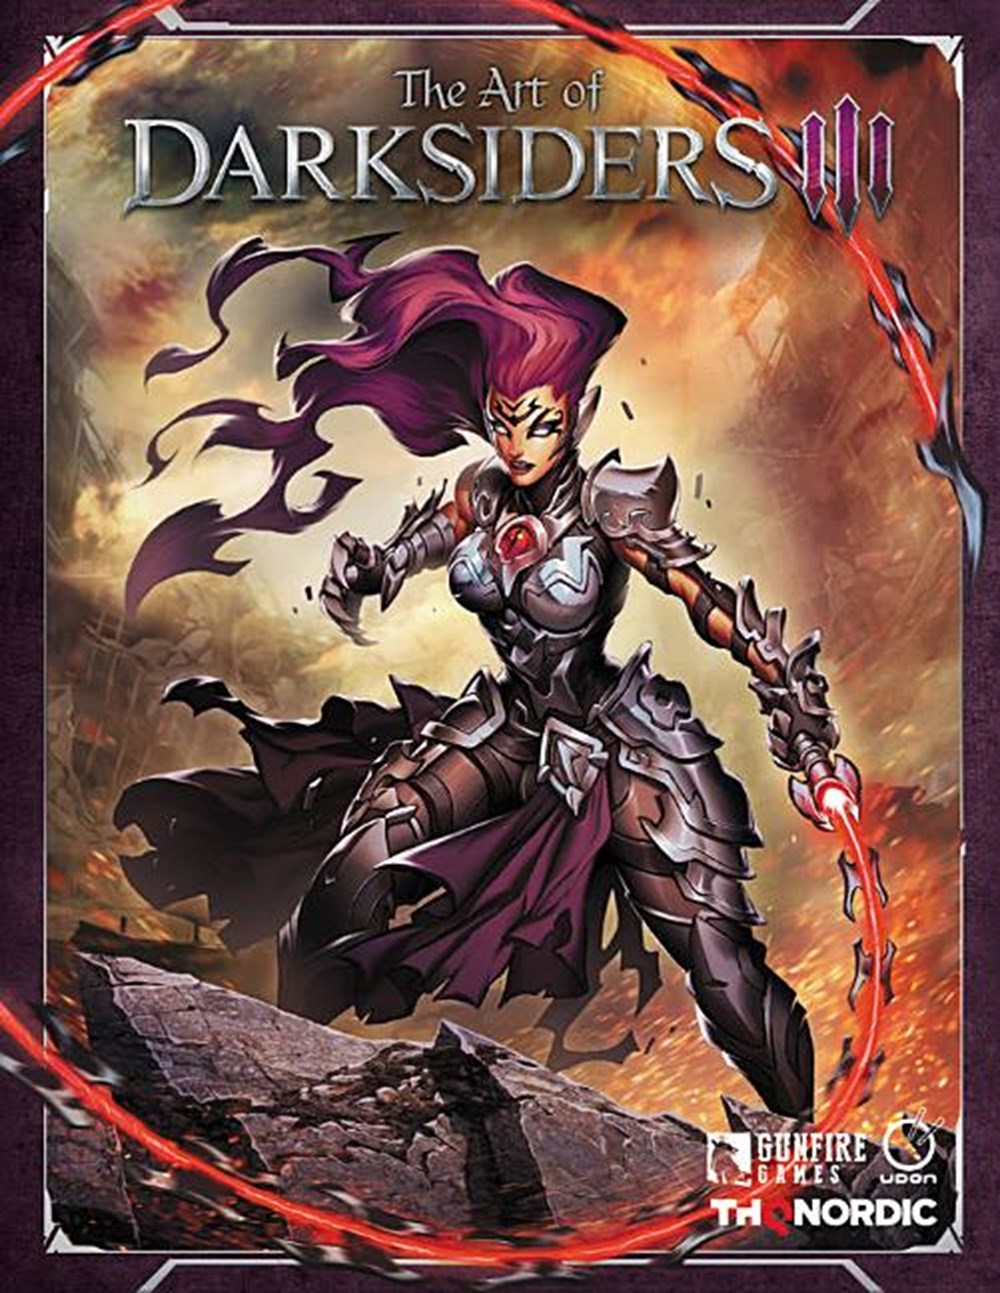 The Art of Darksiders III in Hardcover by Thq Thq